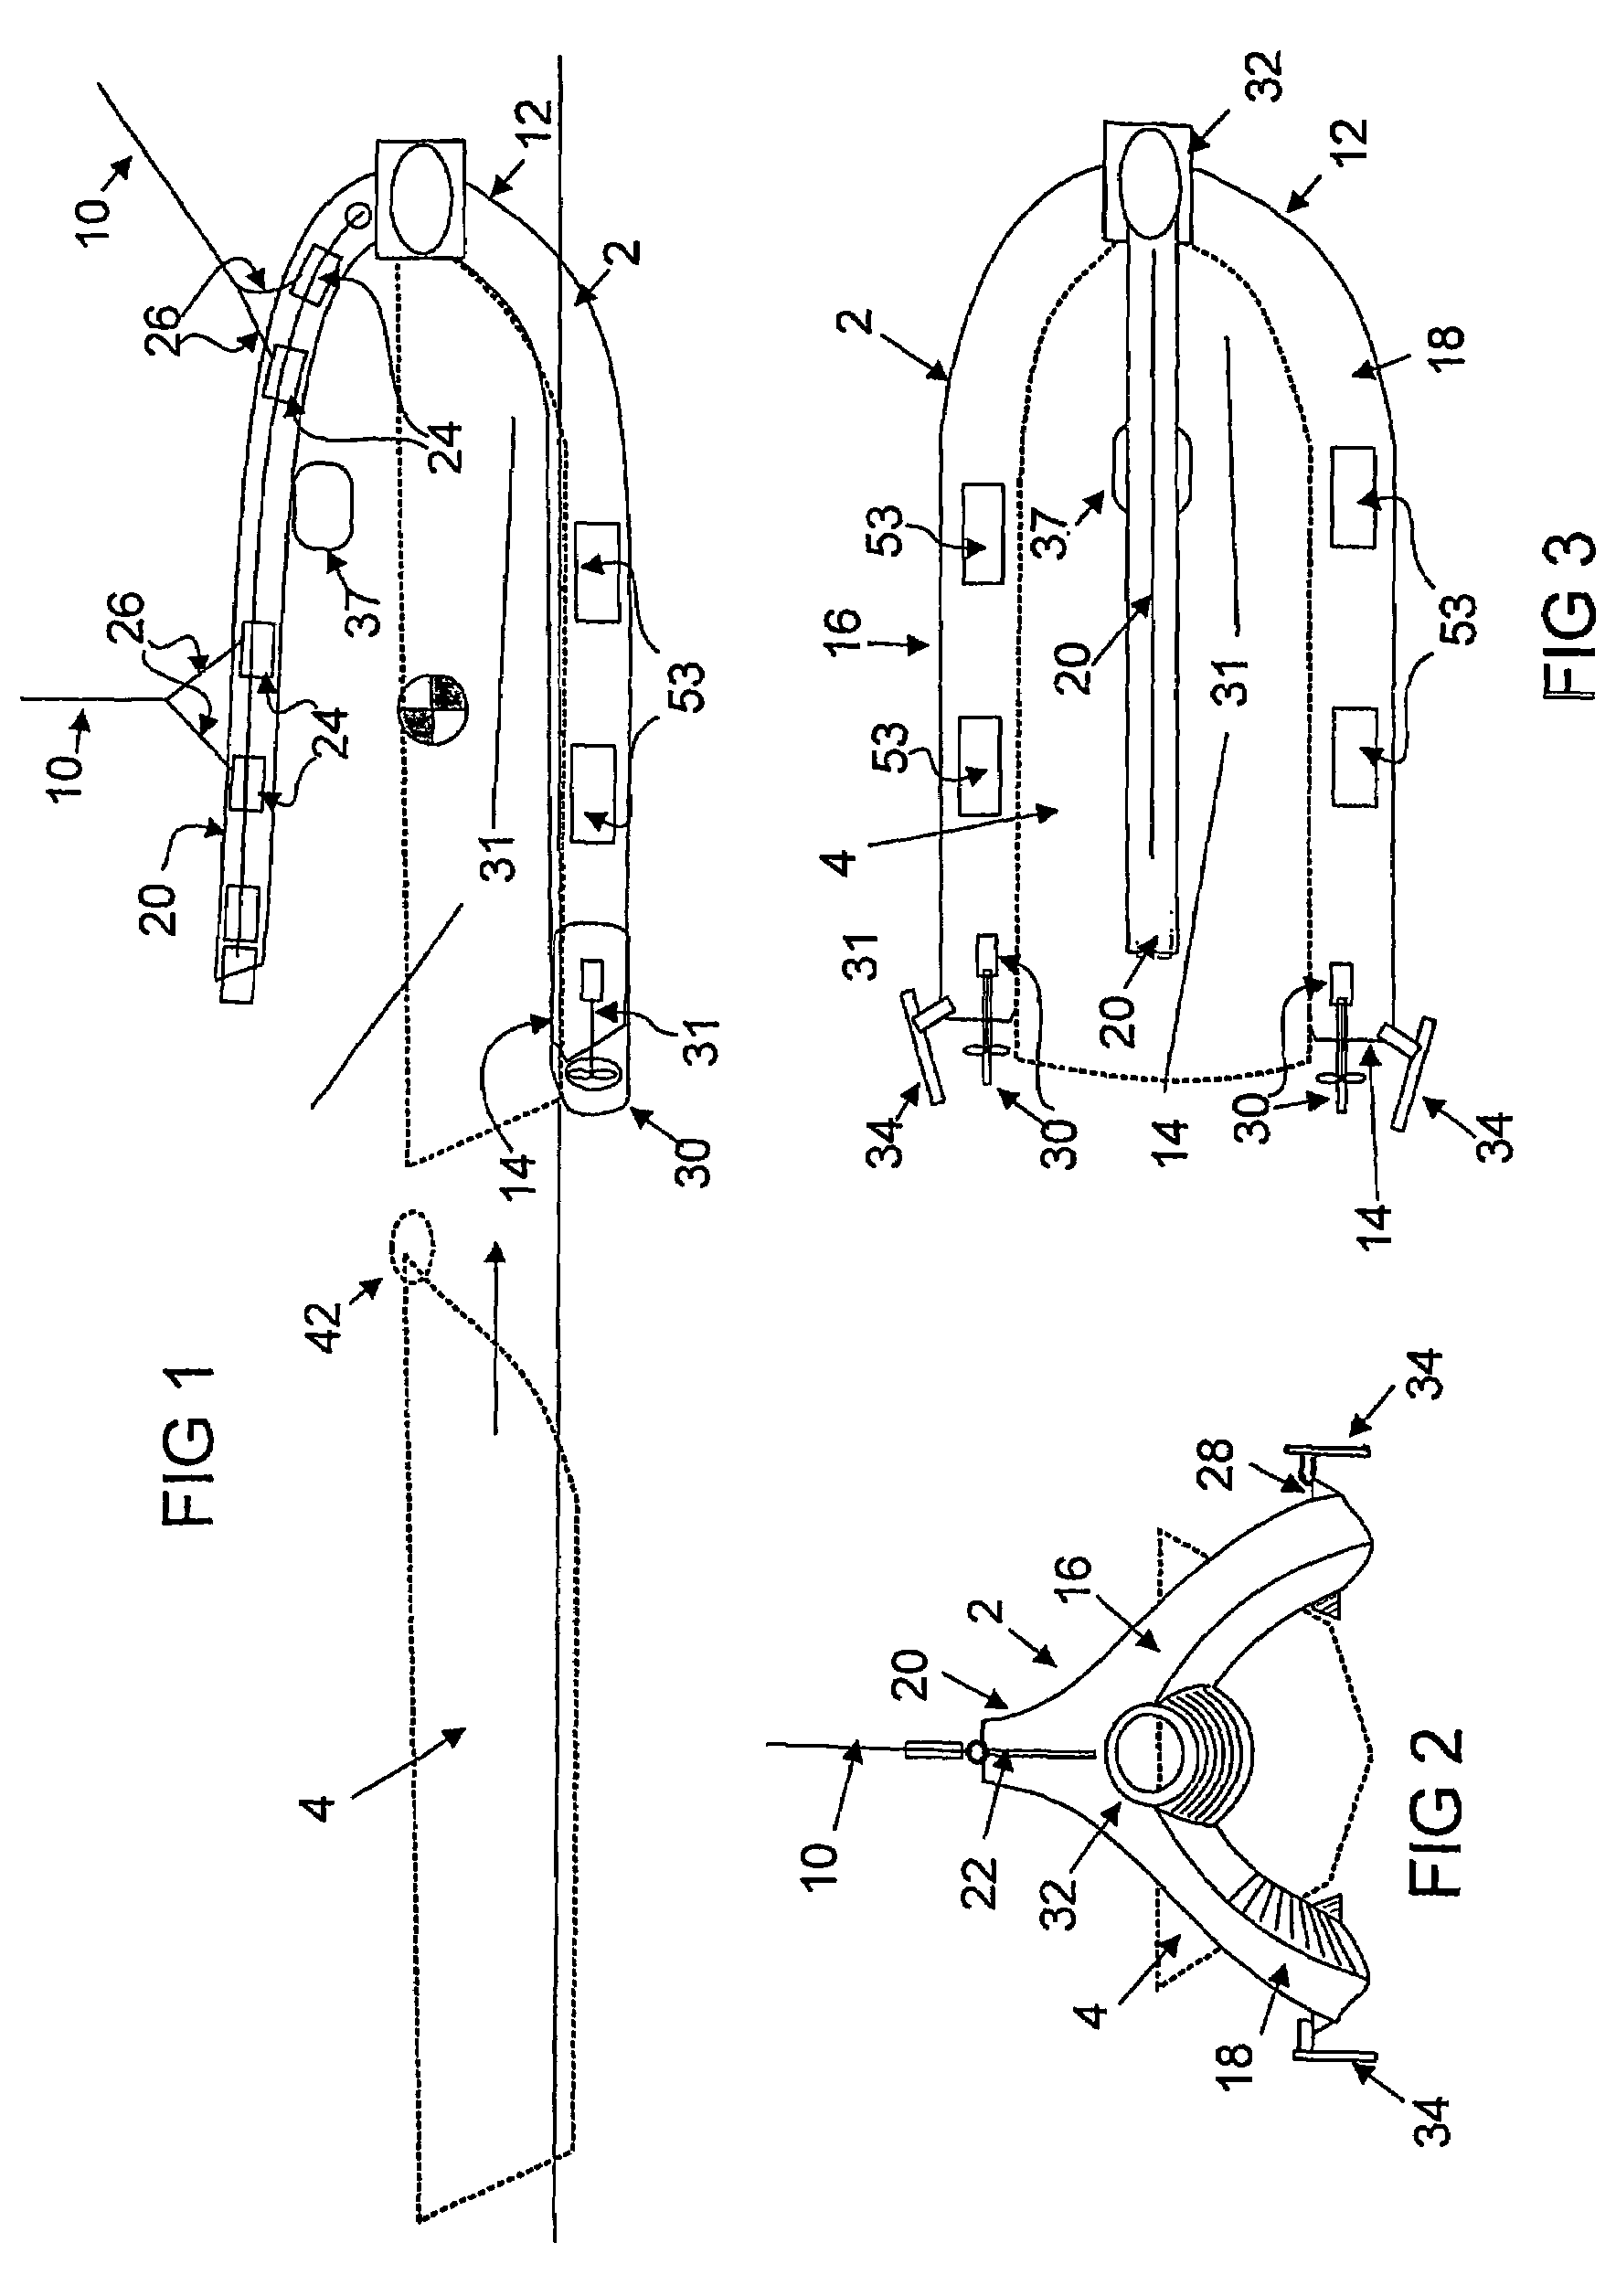 Marine payload handling craft and system